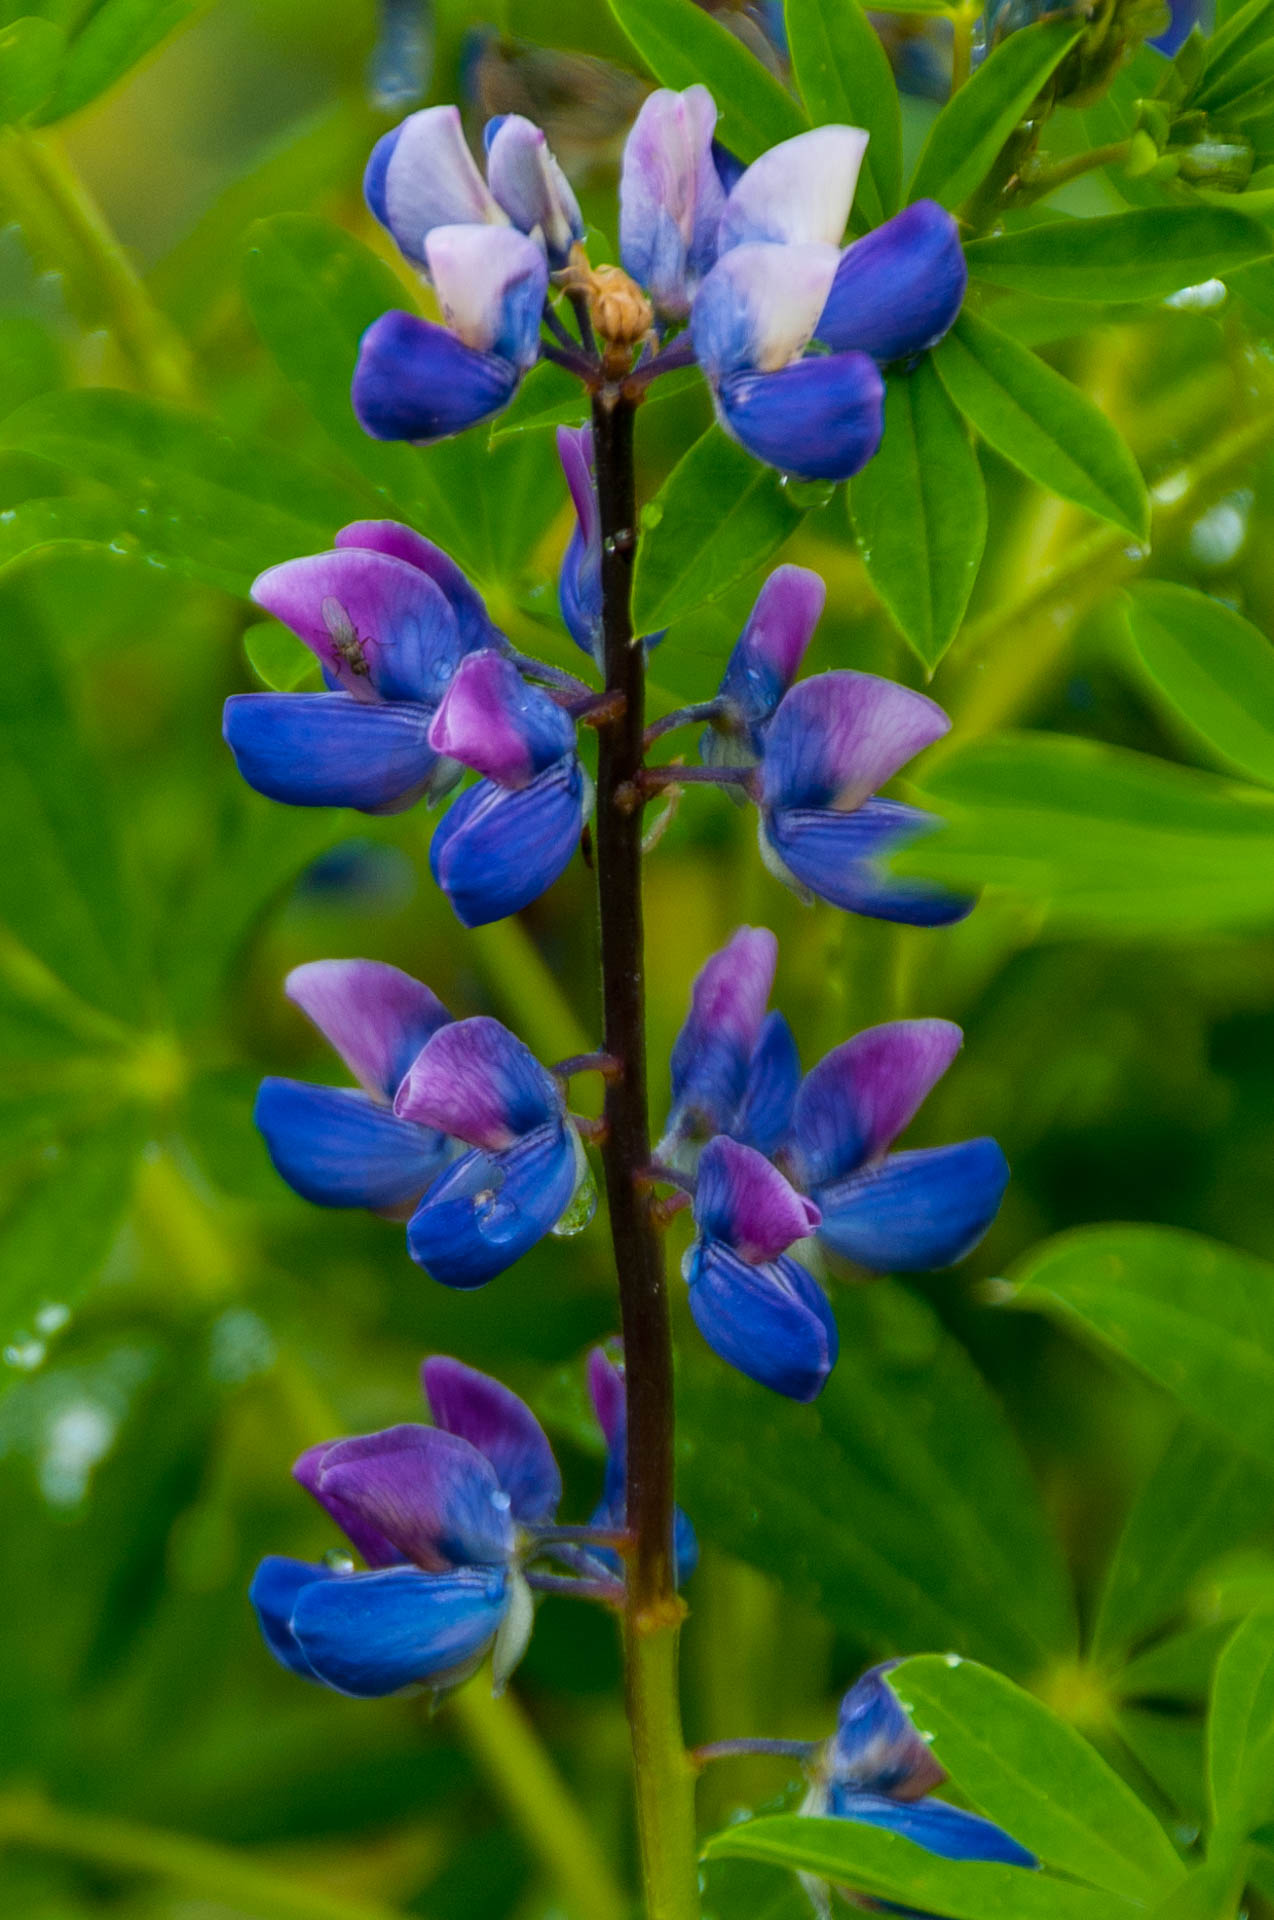 Wildflowers along the Mendenhall Glacier trail